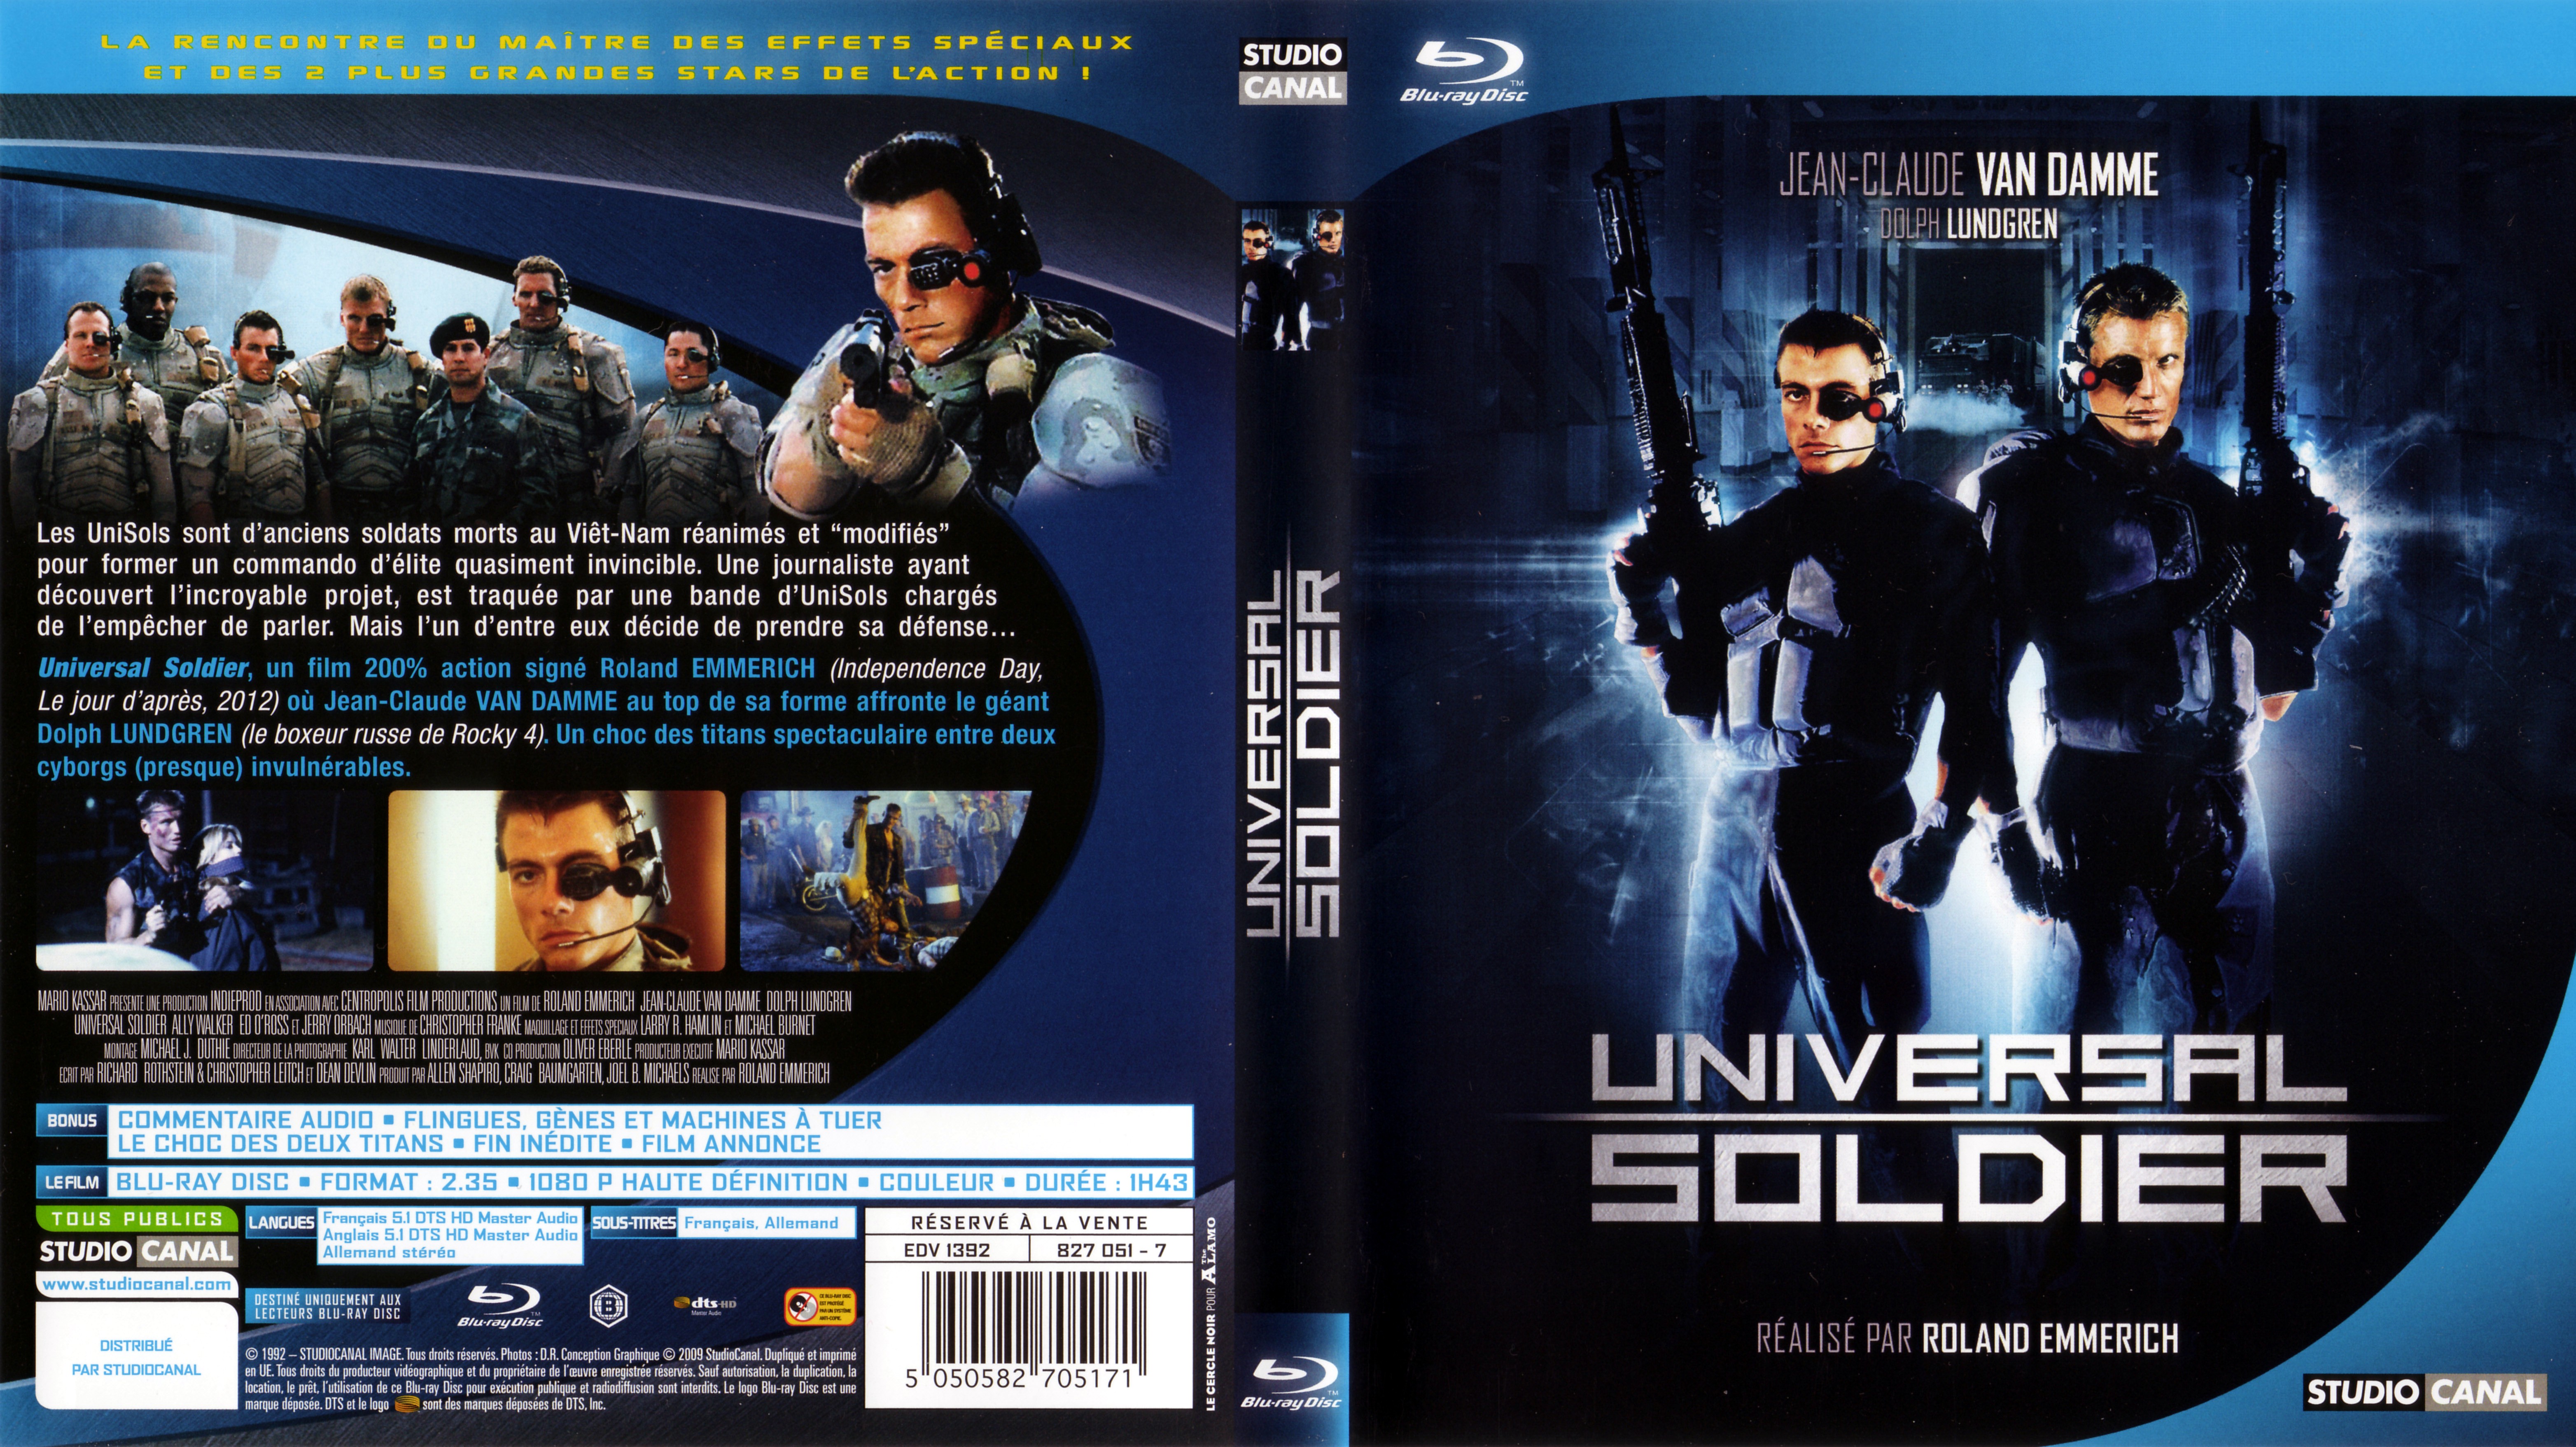 Jaquette DVD Universal soldier (BLU-RAY)